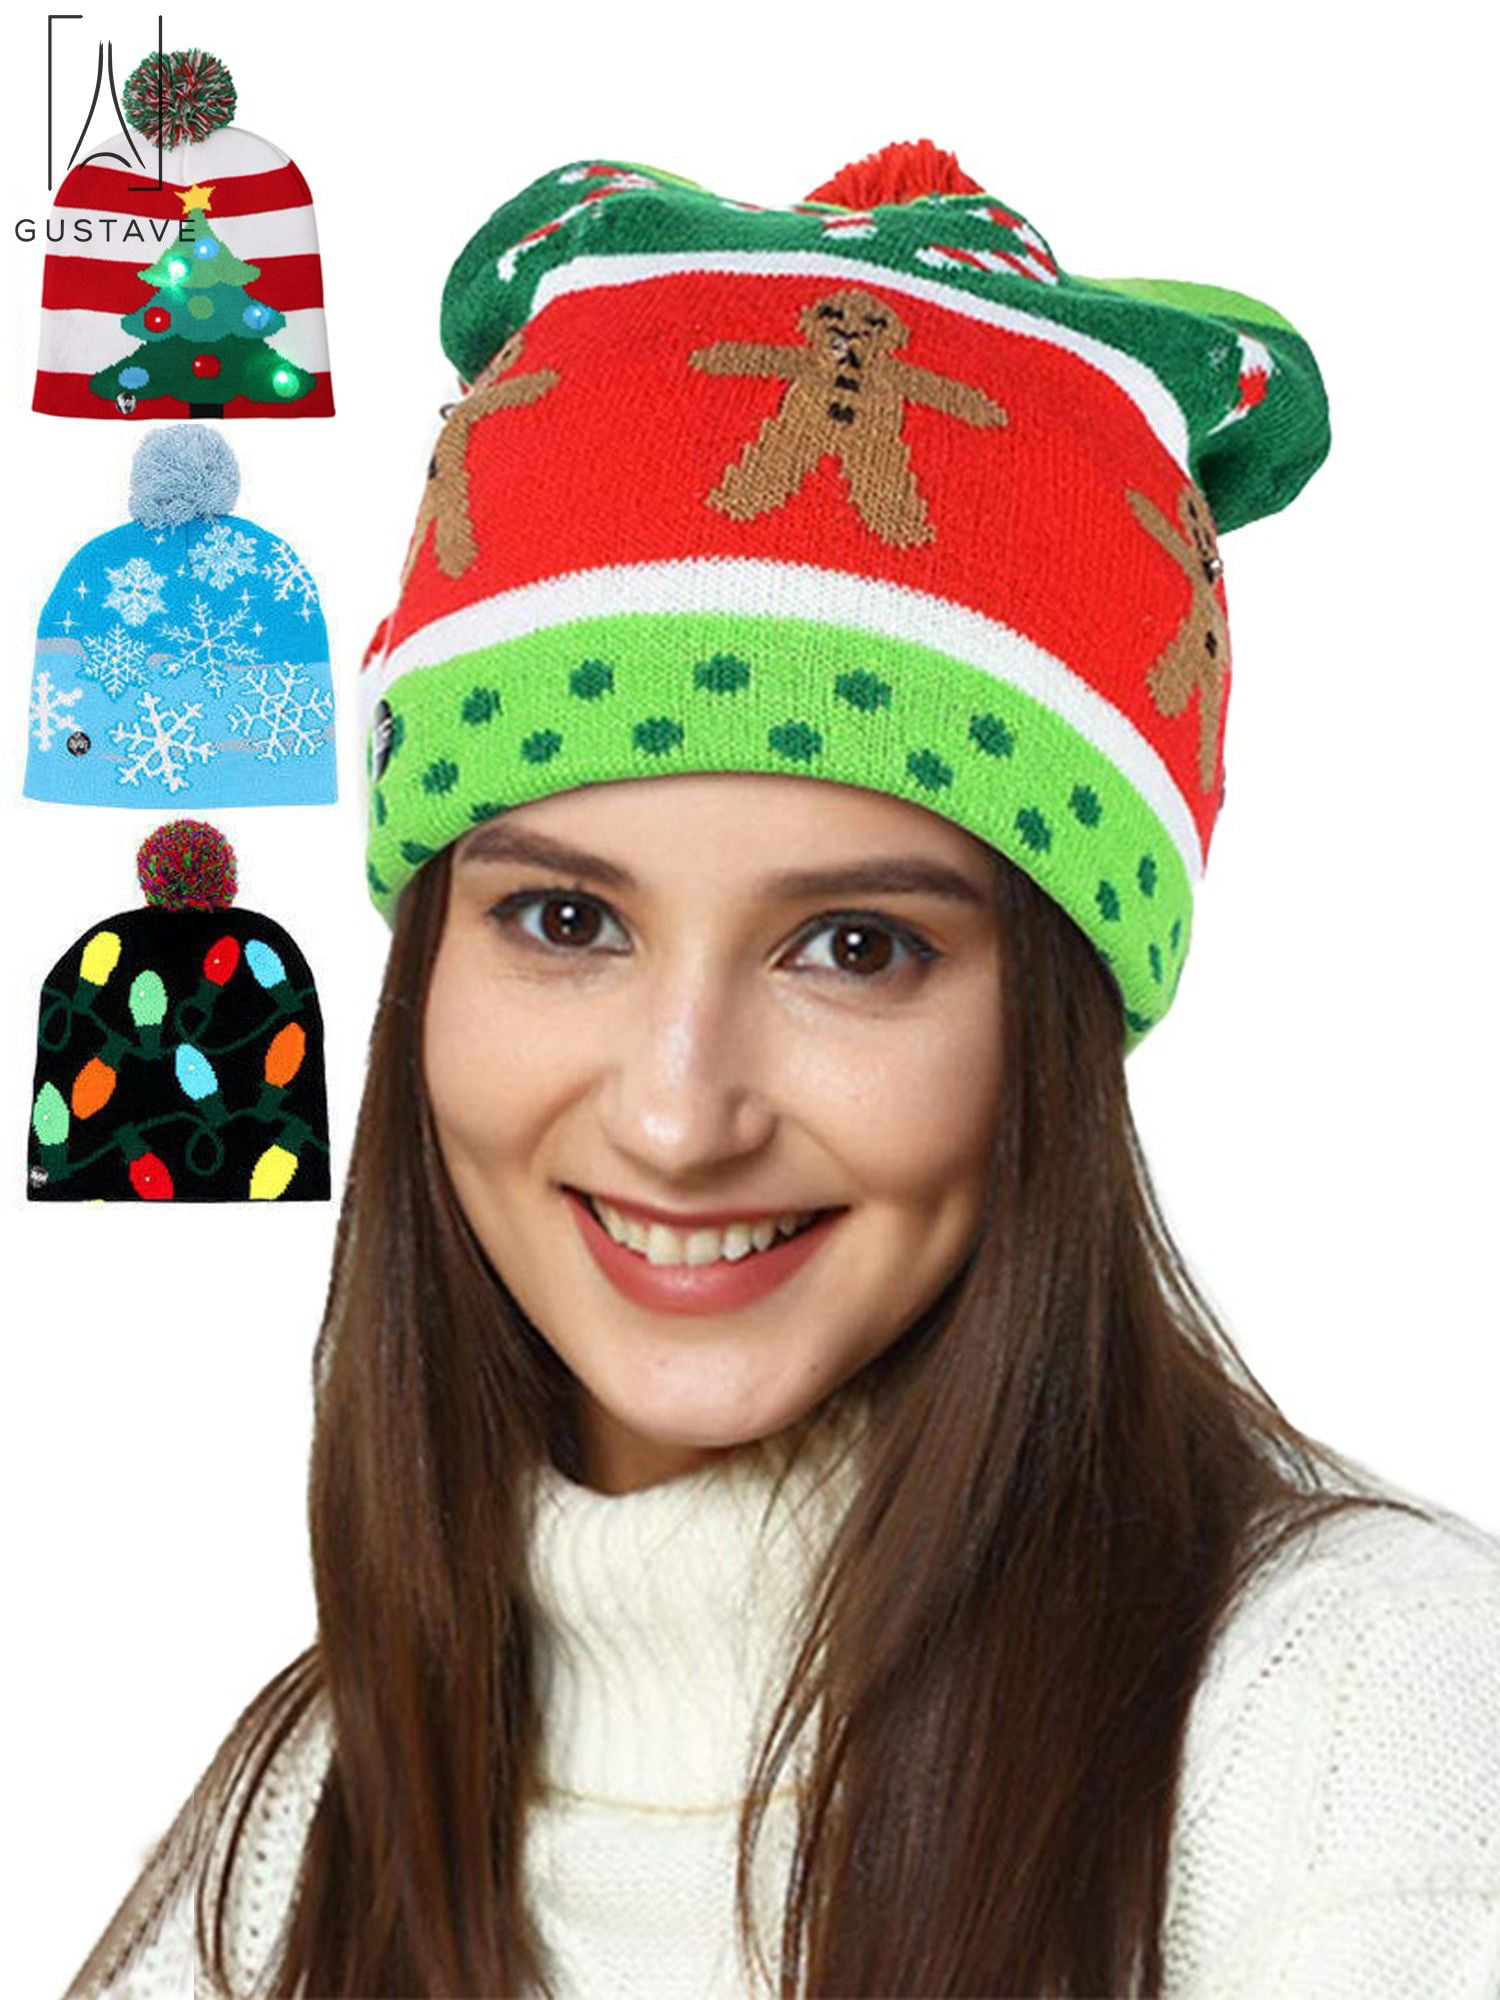 Gustave GustaveDesign Christmas LED Light Up Beanie Hat Knit Cap Great Presents for Unisex 3